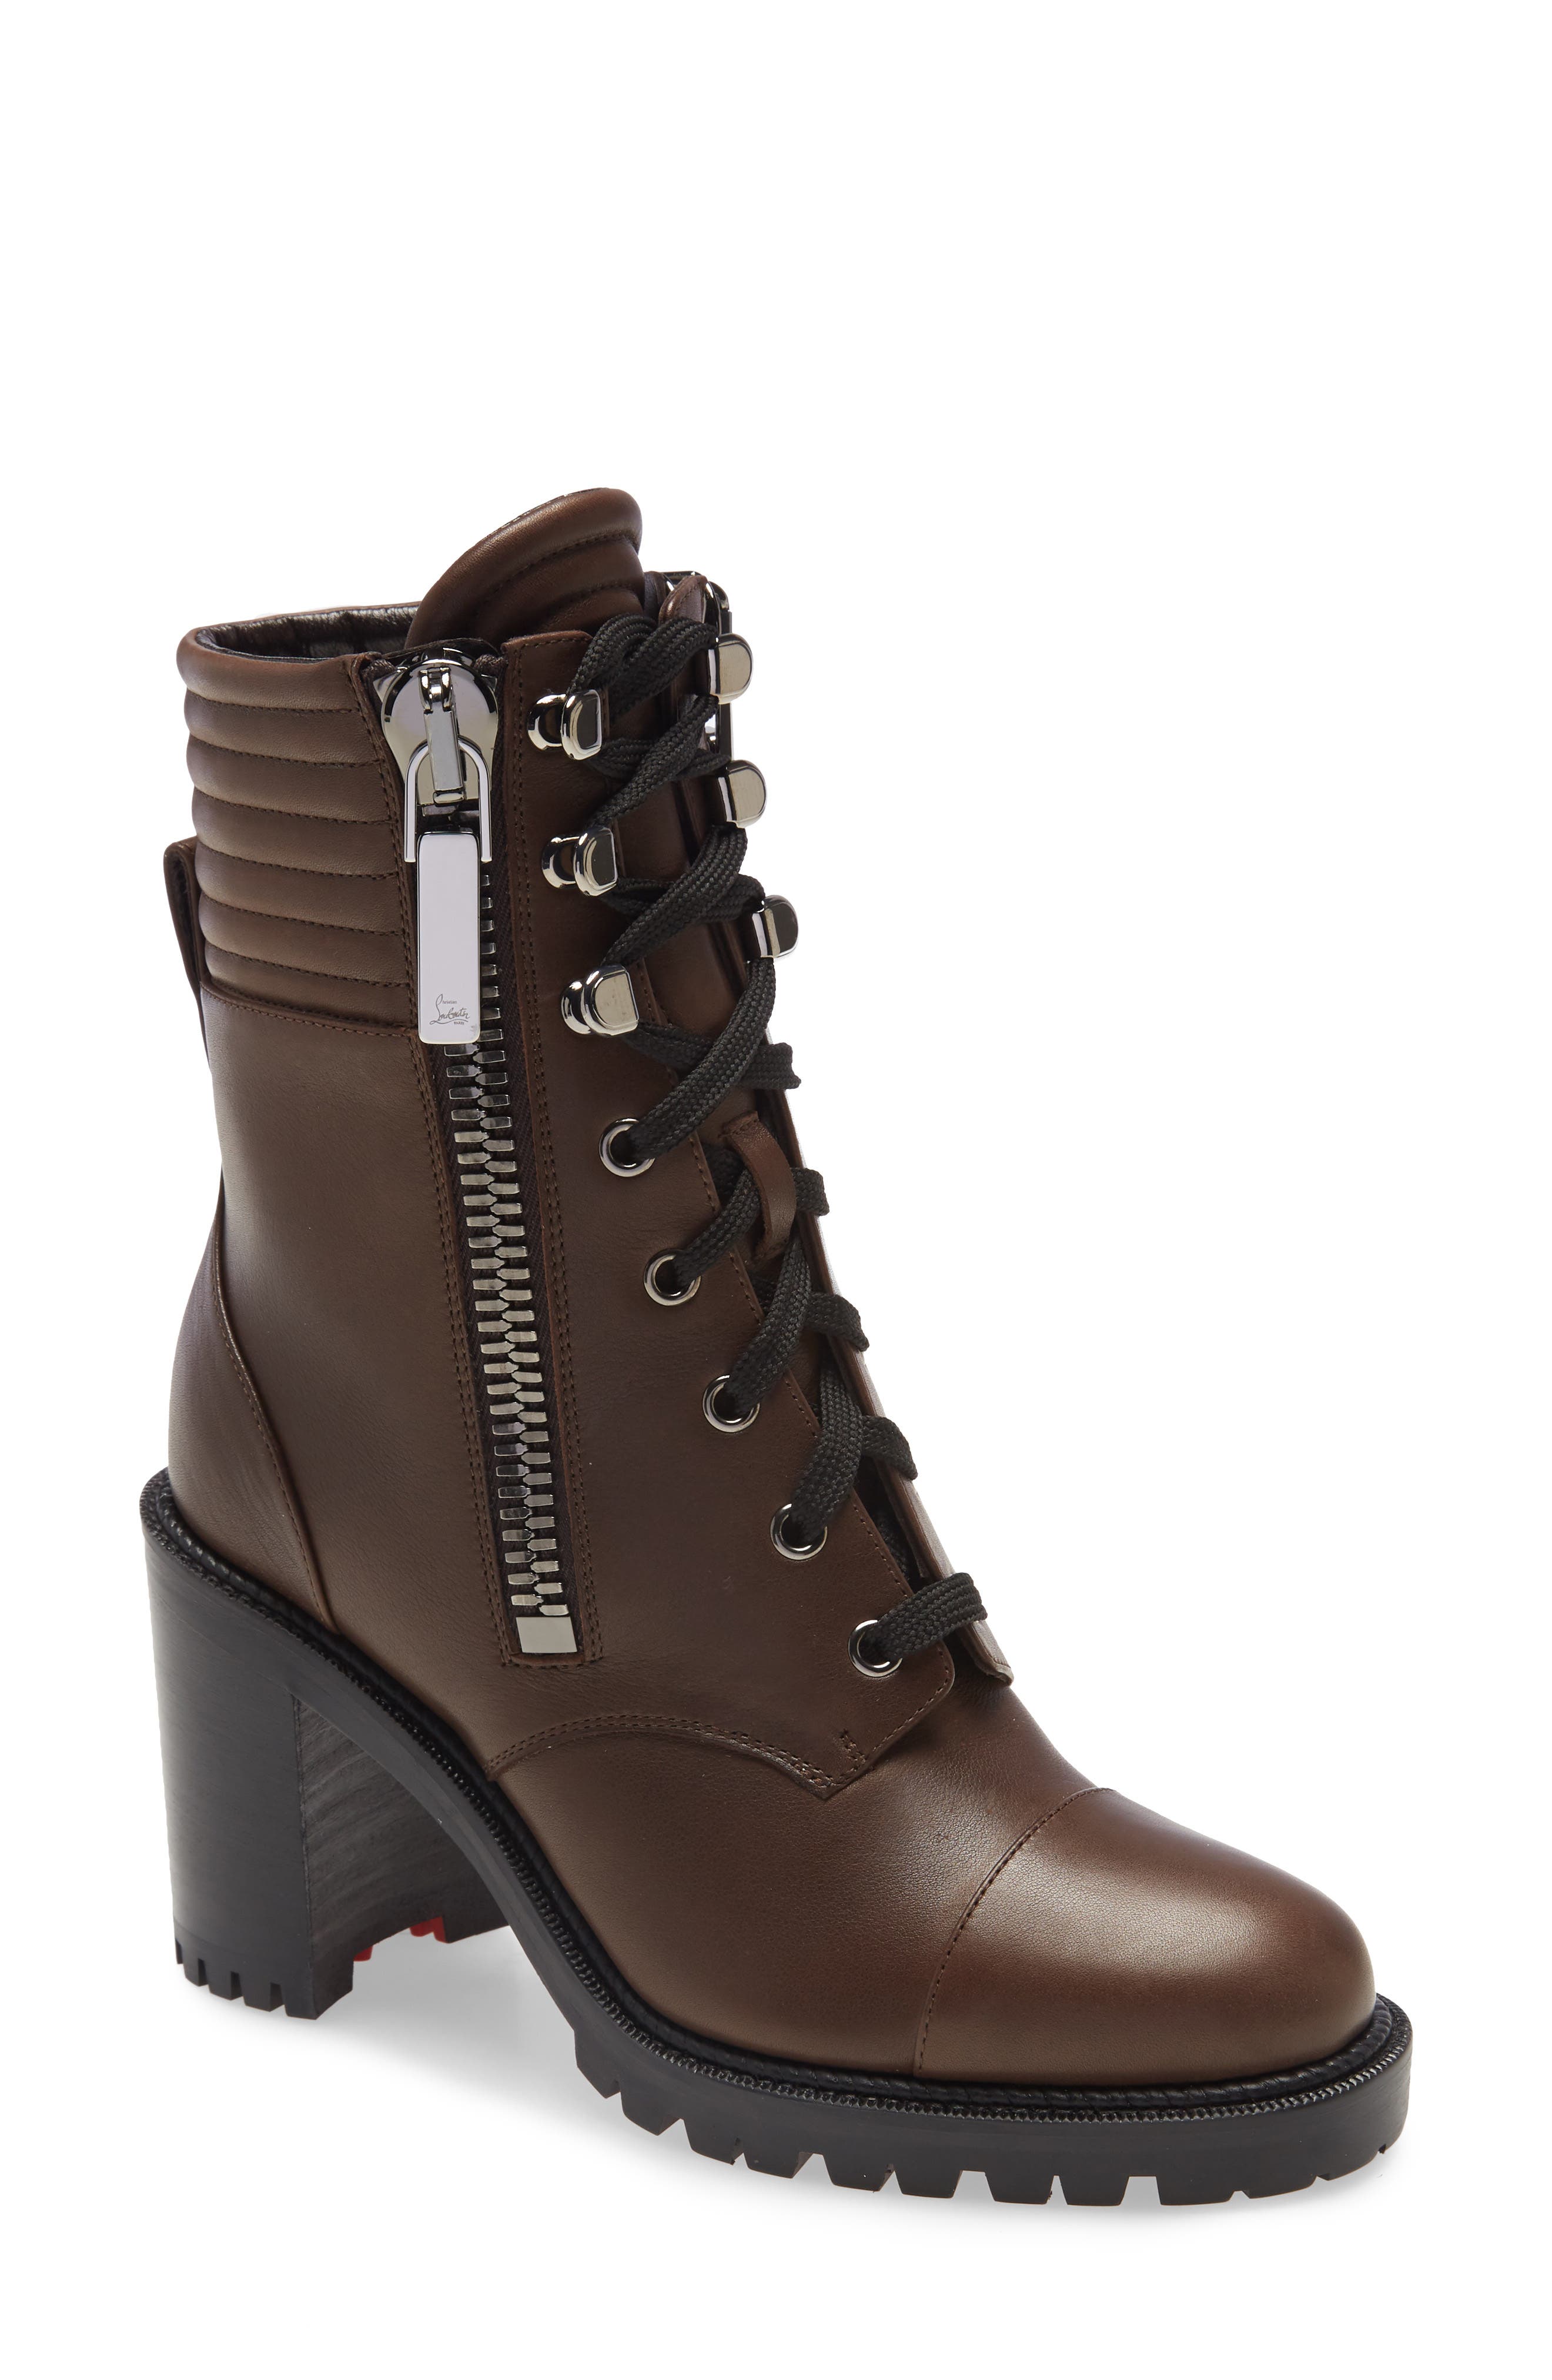 Hiking Boots | Nordstrom